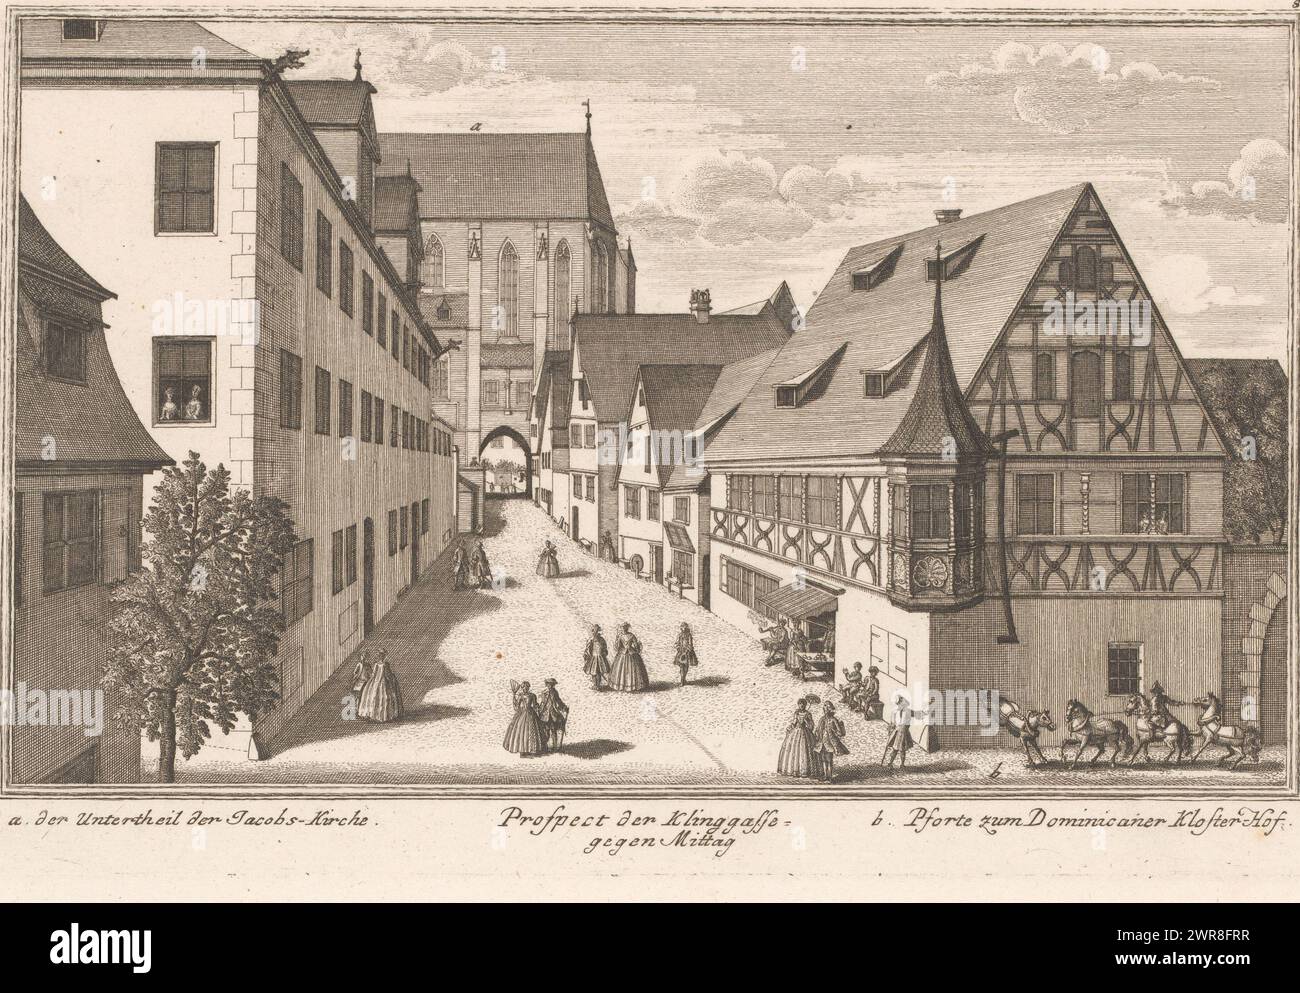 View of the Klinggasse, in Rothenburg ob der Tauber, Prospect der Klinggasse - gegen Mittag (title on object), Numbered top right: 8., print maker: anonymous, publisher: Adam Wolfgang Winterschmidt, 1758 - 1796, paper, etching, engraving, height 196 mm × width 297 mm, print Stock Photo